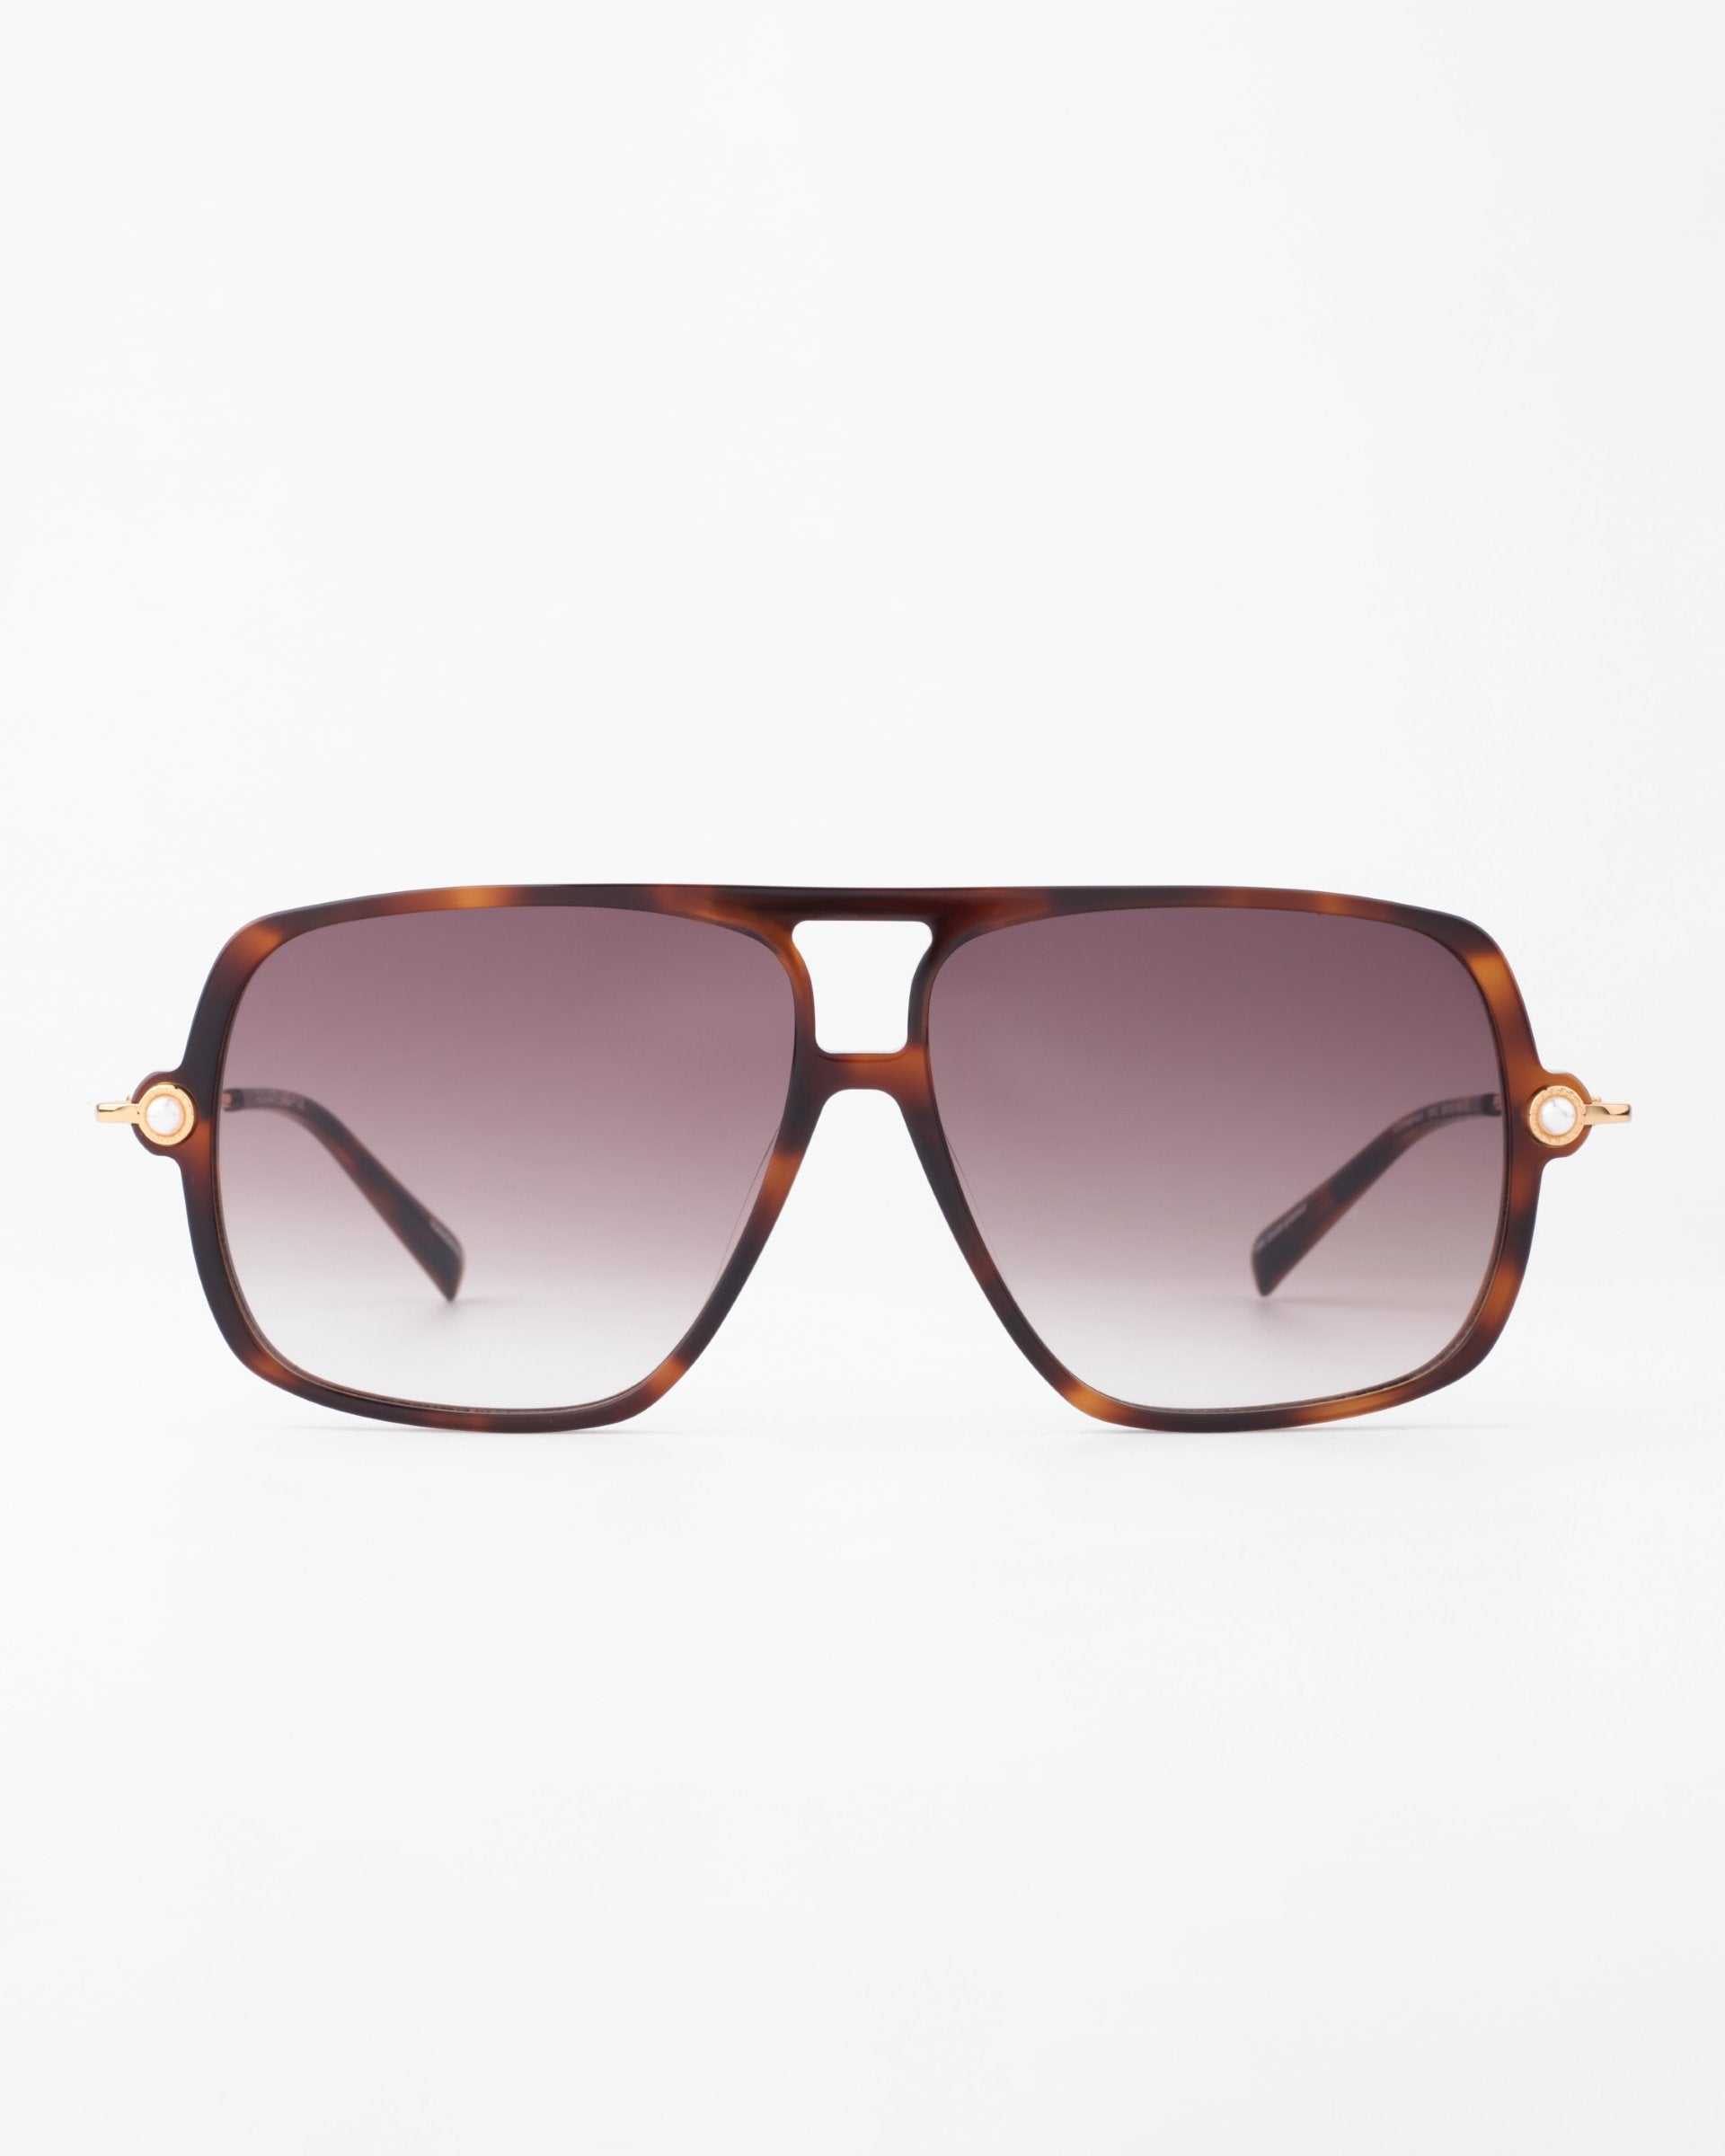 The Cinnamon by For Art's Sake® is a pair of square-shaped sunglasses with a prominent browline and thick tortoiseshell frames, featuring gradient lenses that darken from light at the bottom to darker at the top. The arms taper towards the ear and showcase small metal accents with faux pearl embellishment.